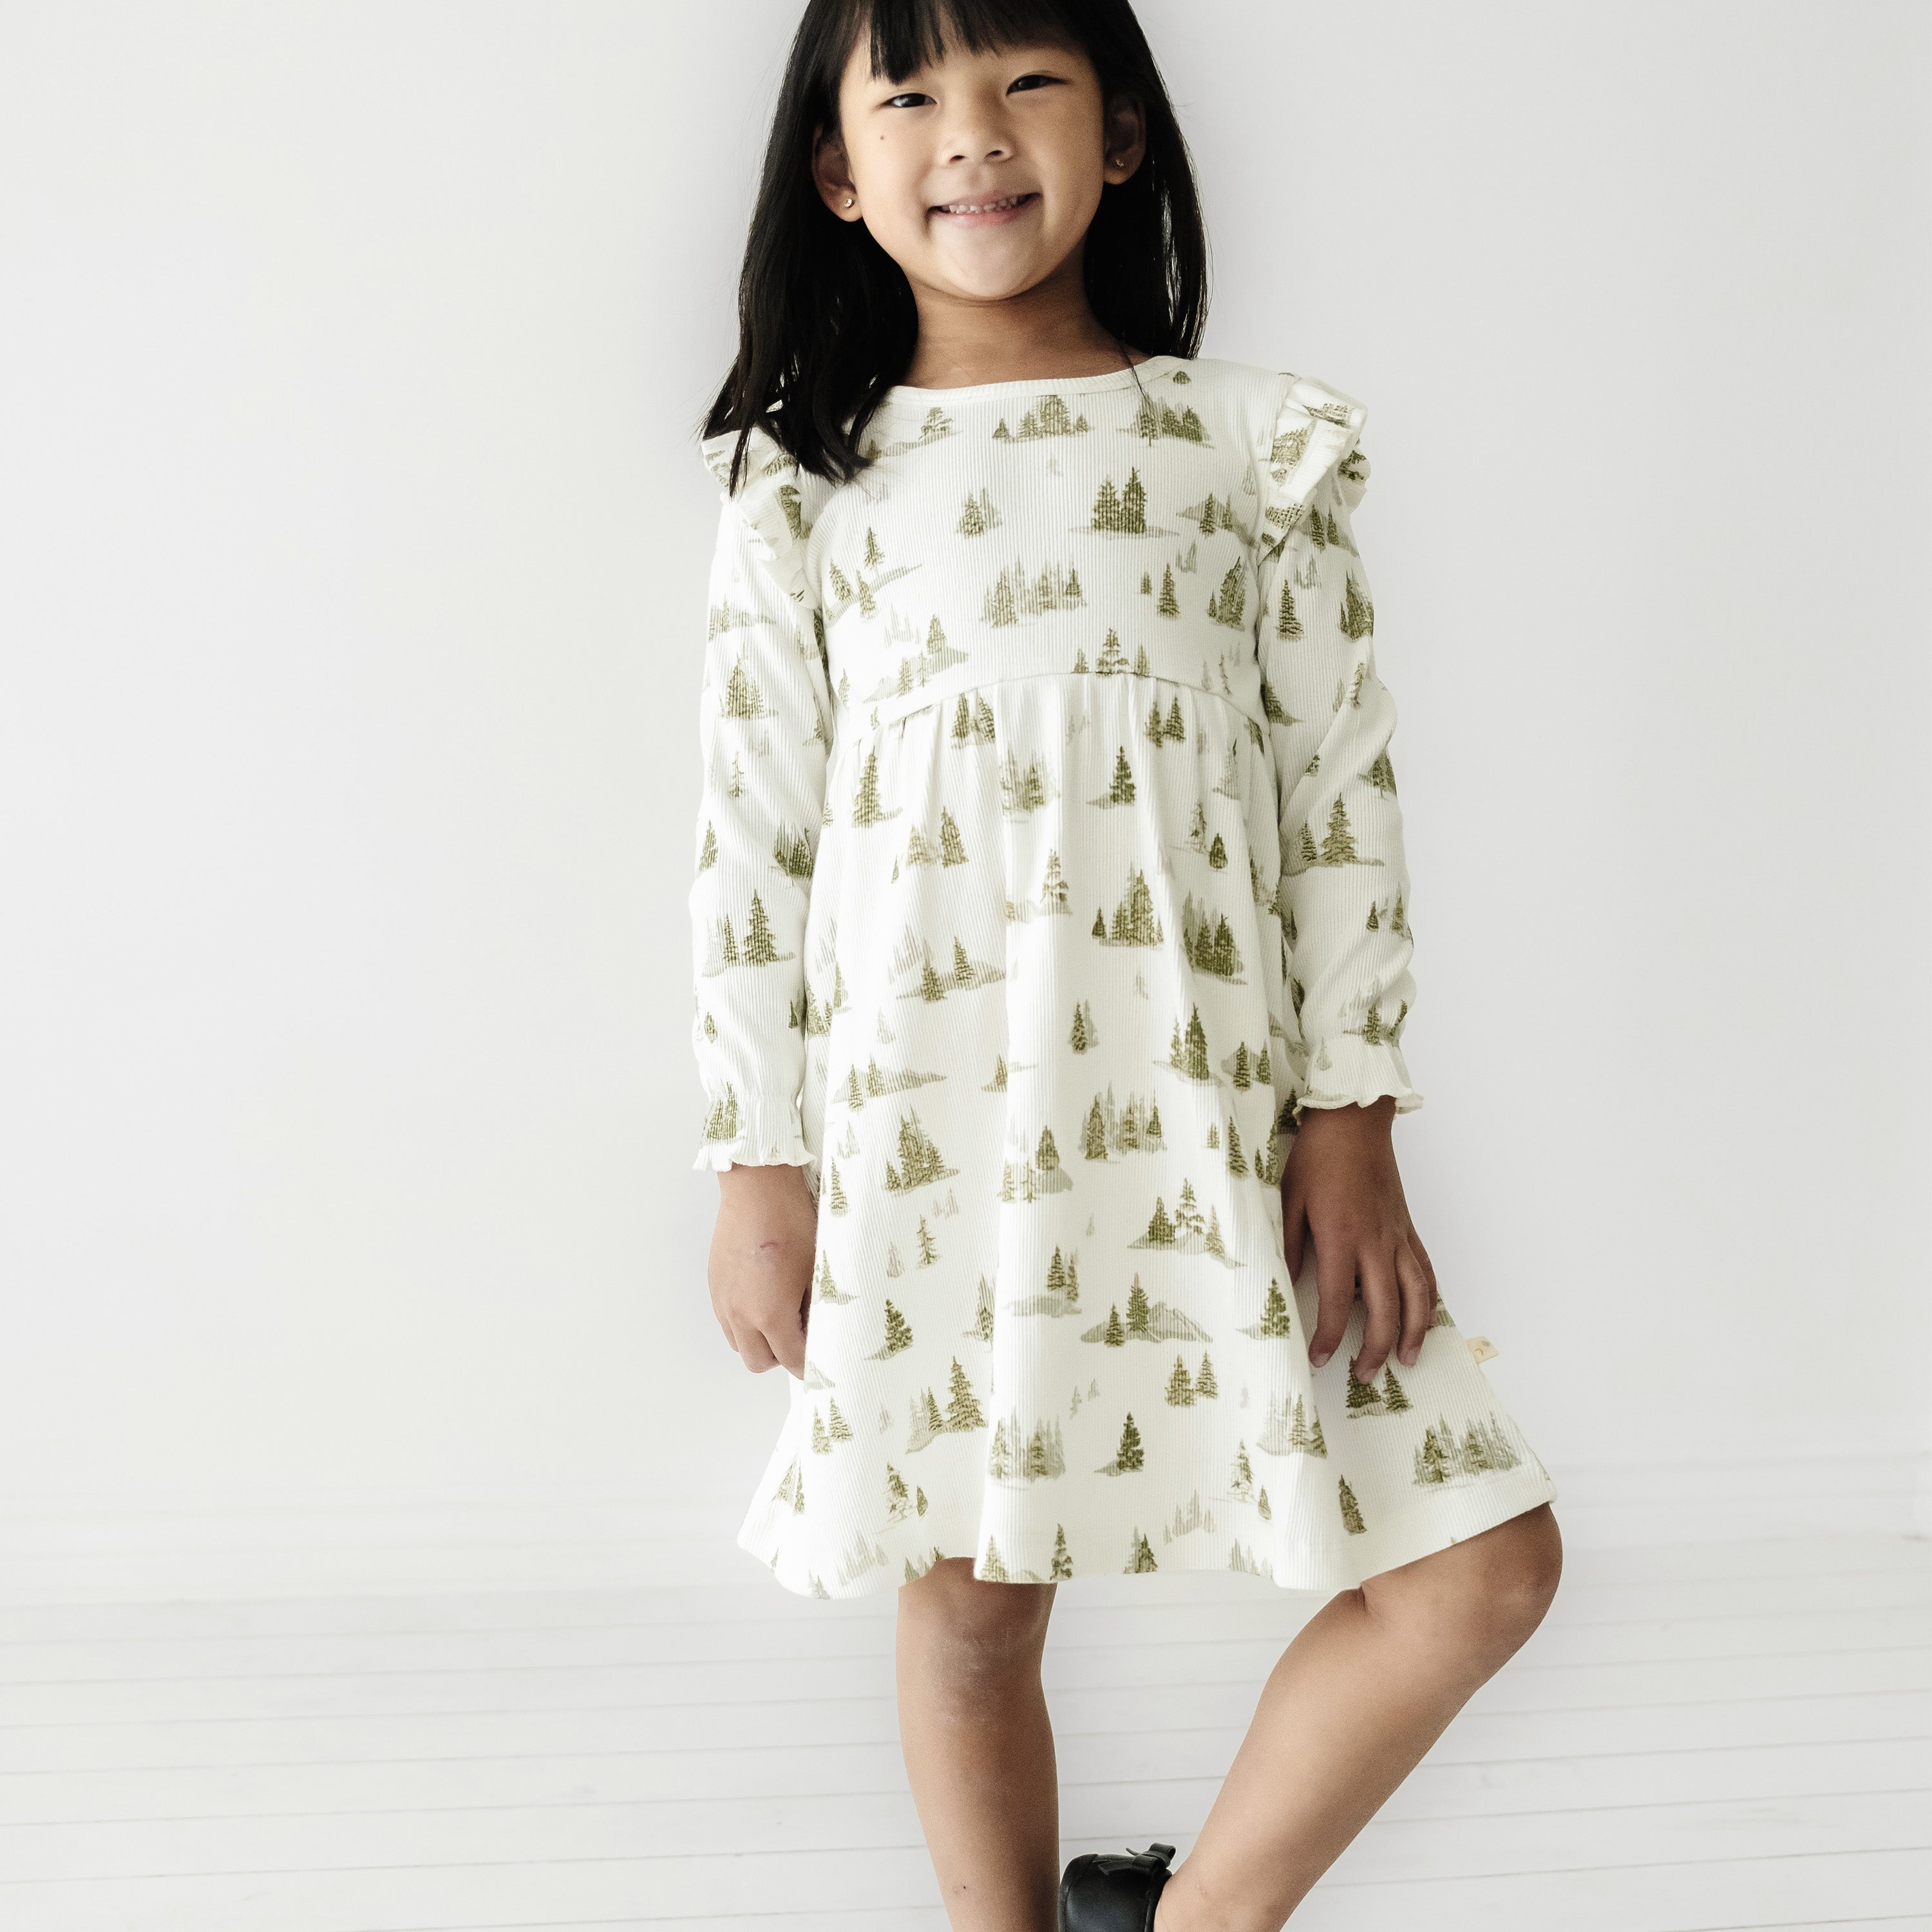 A young Asian girl smiling at the camera, wearing an Organic Girls Organic Ruffle Dress - Frosted Fir with a tree pattern, standing against a plain white background.